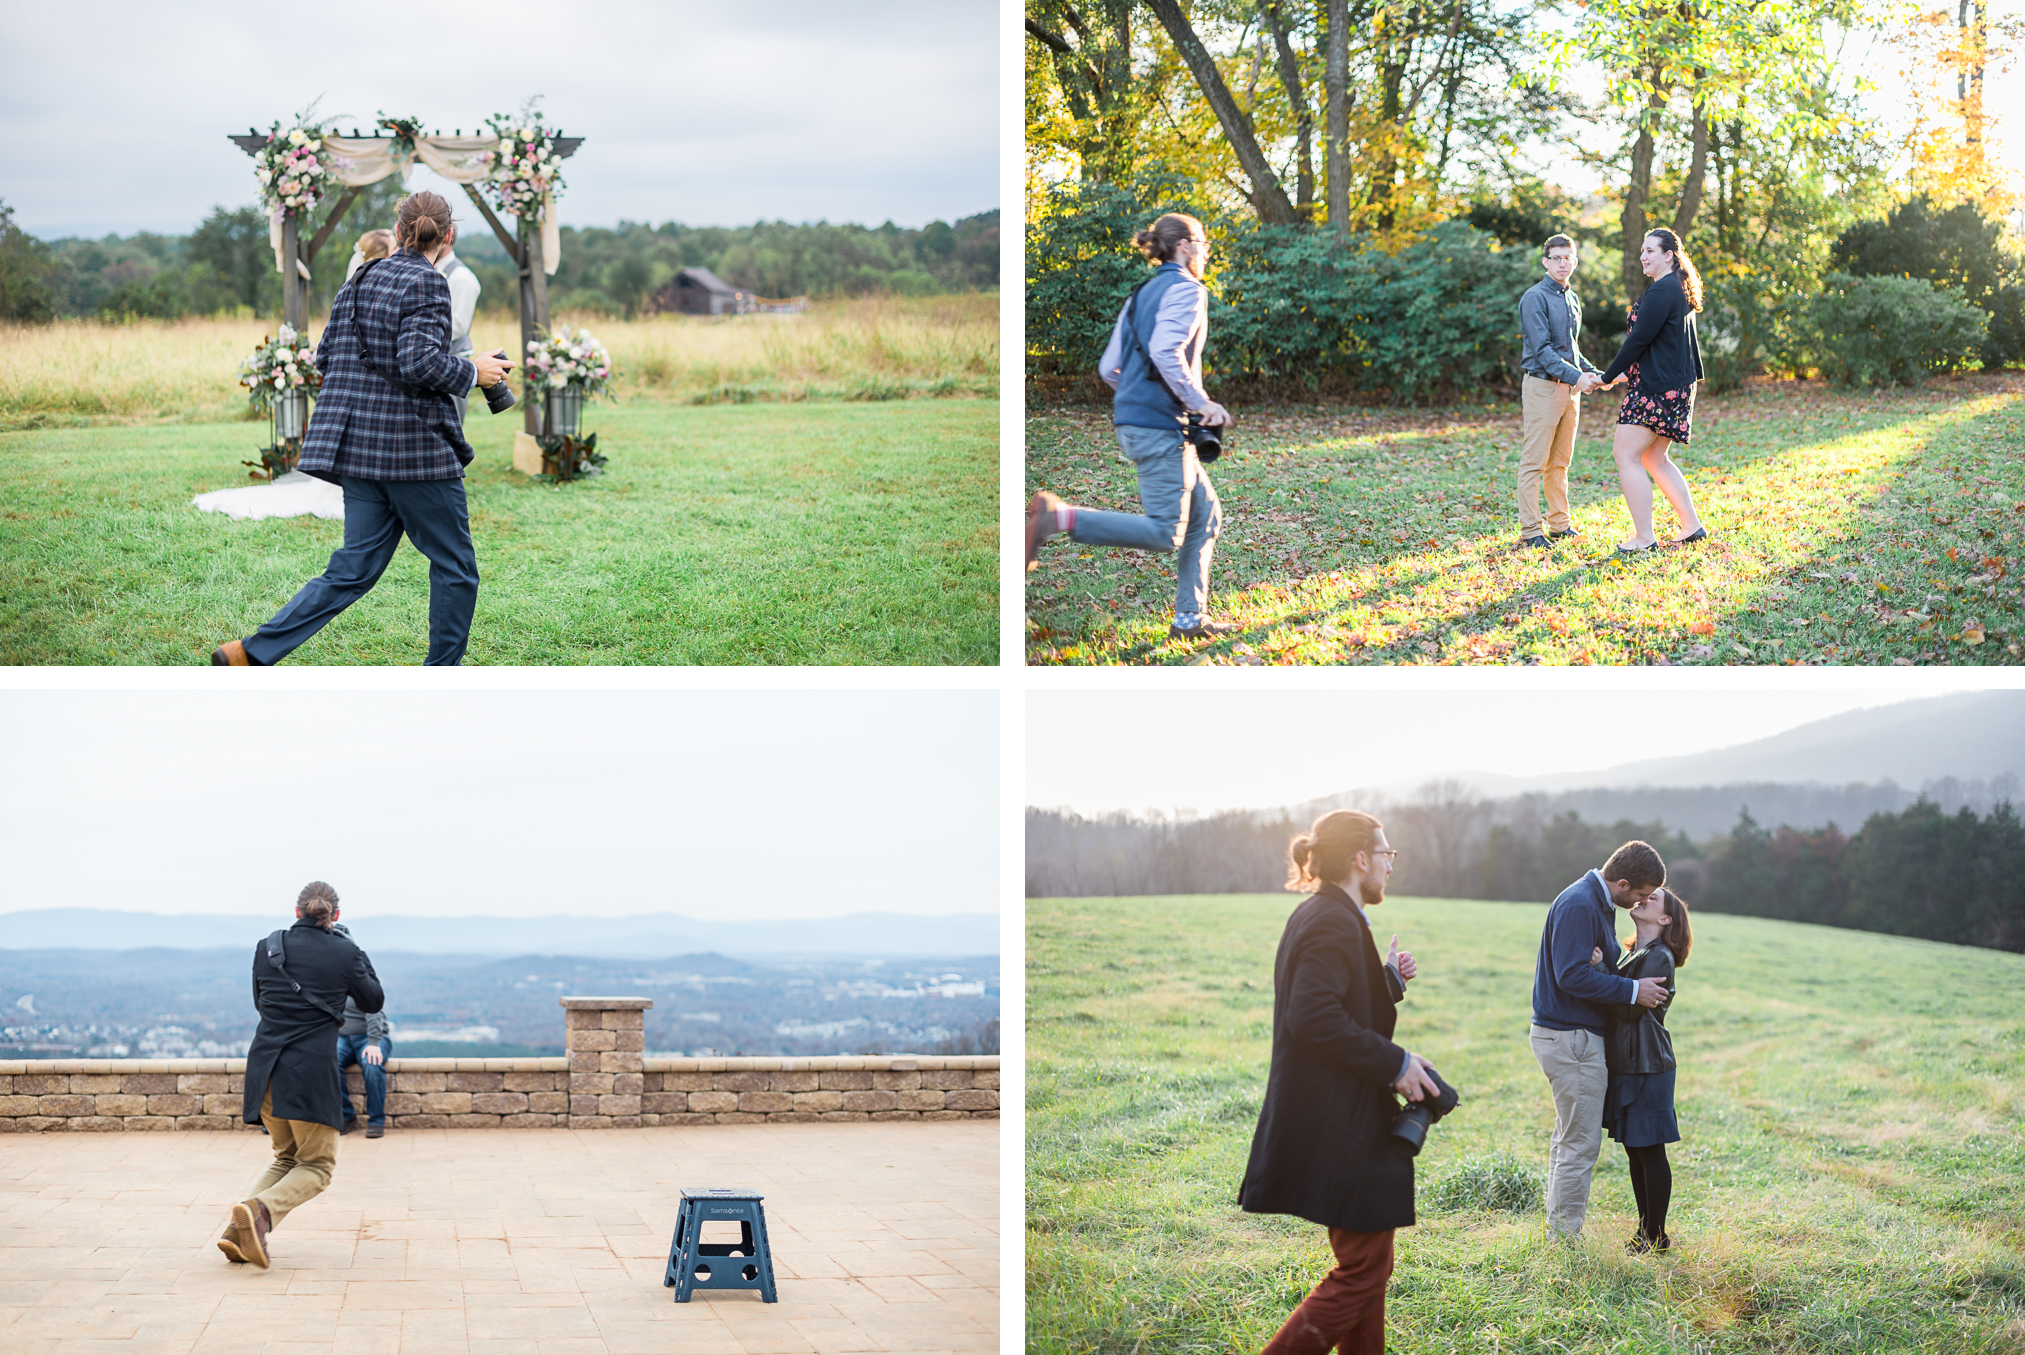 Behind the Scenes - Hunter and Sarah Photography 2018